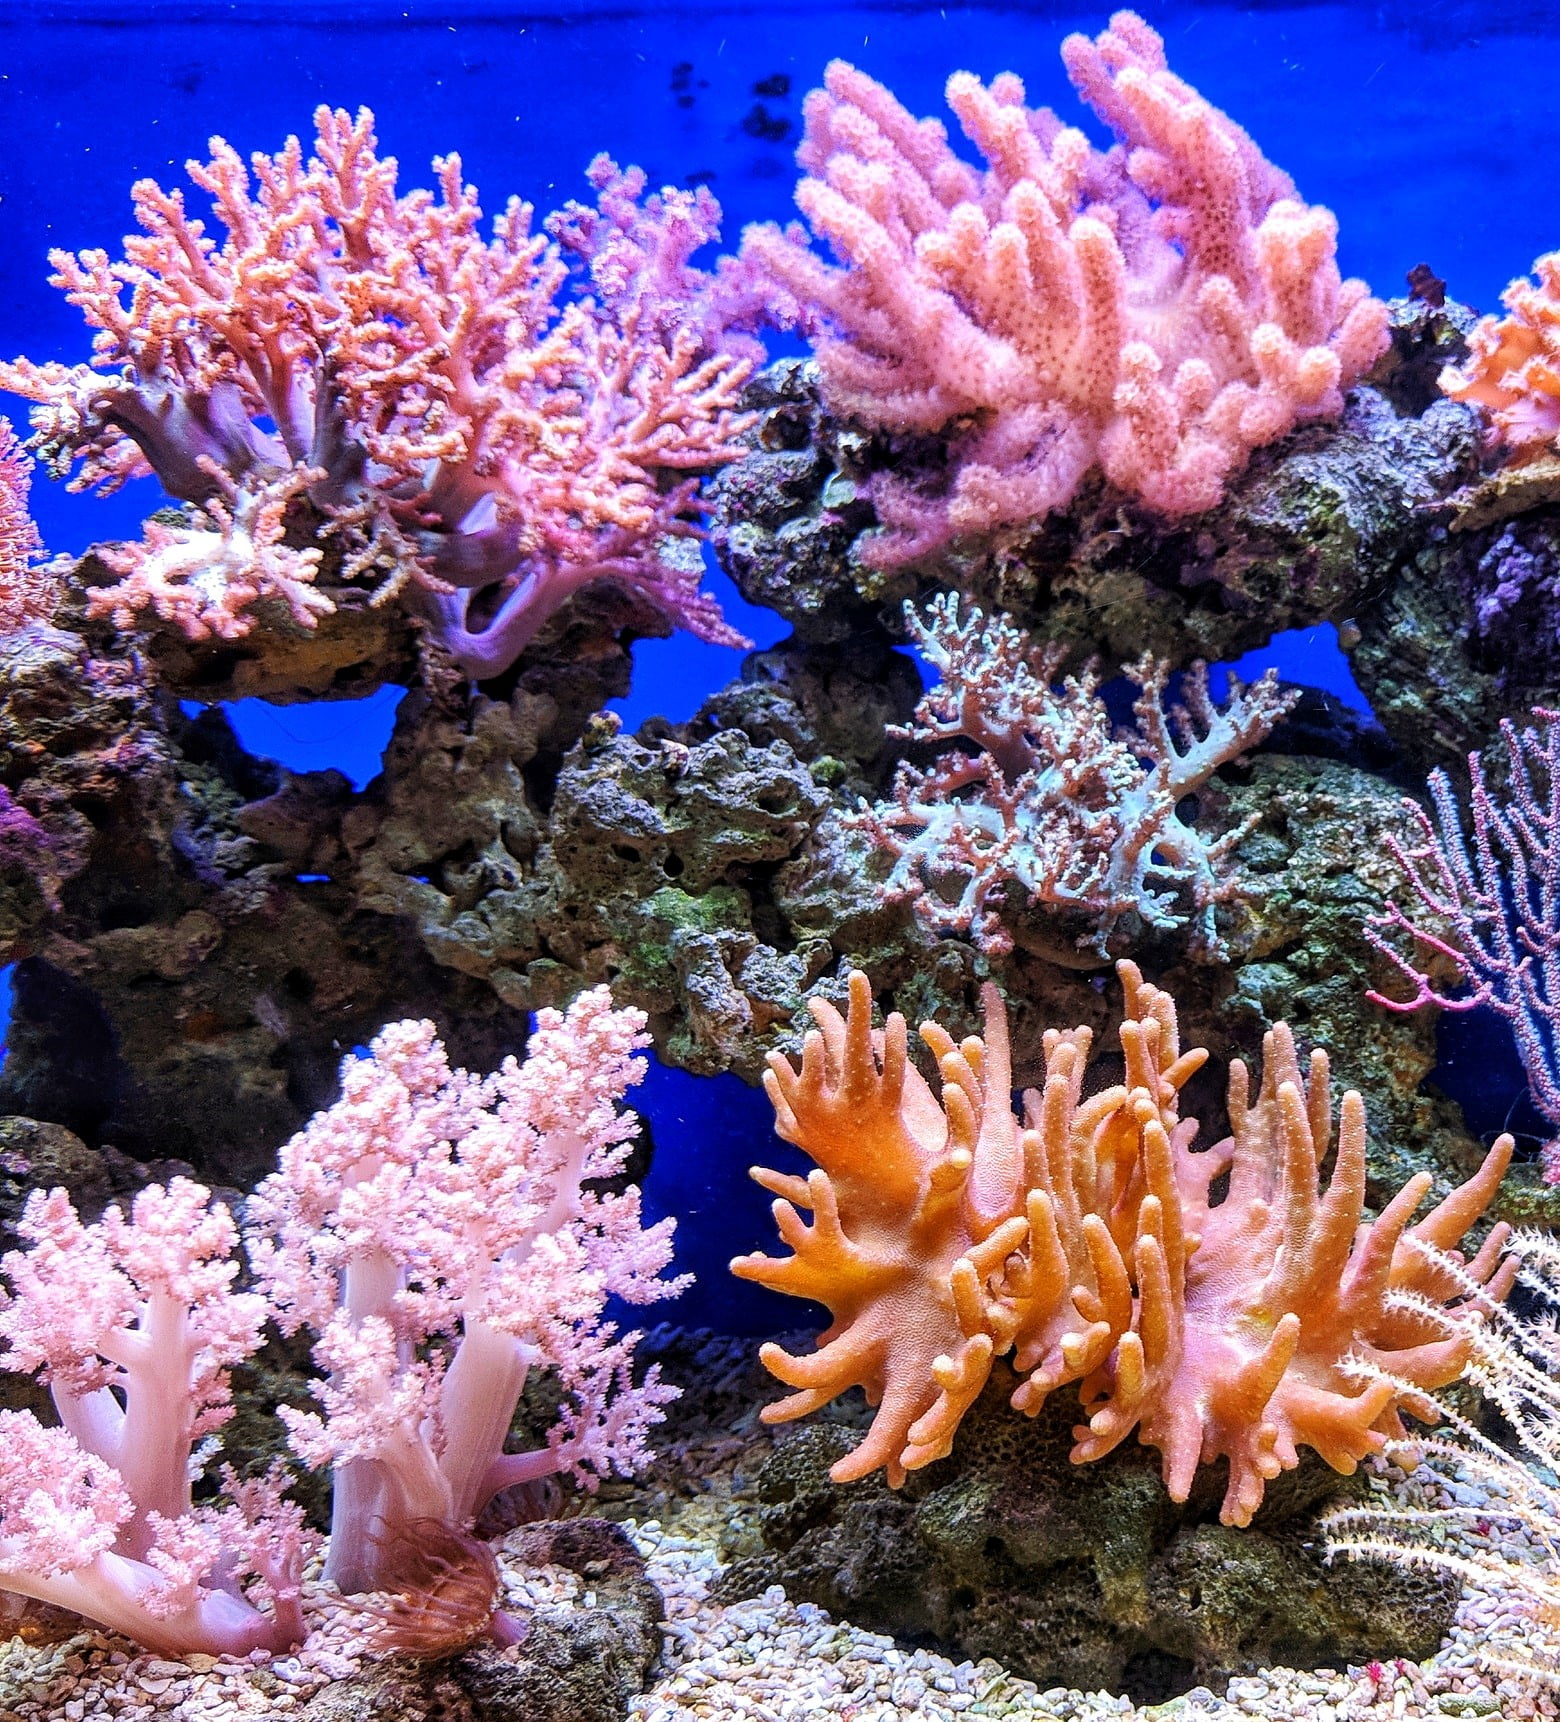 What Is The Role Of Coral Reefs In Climate Change?